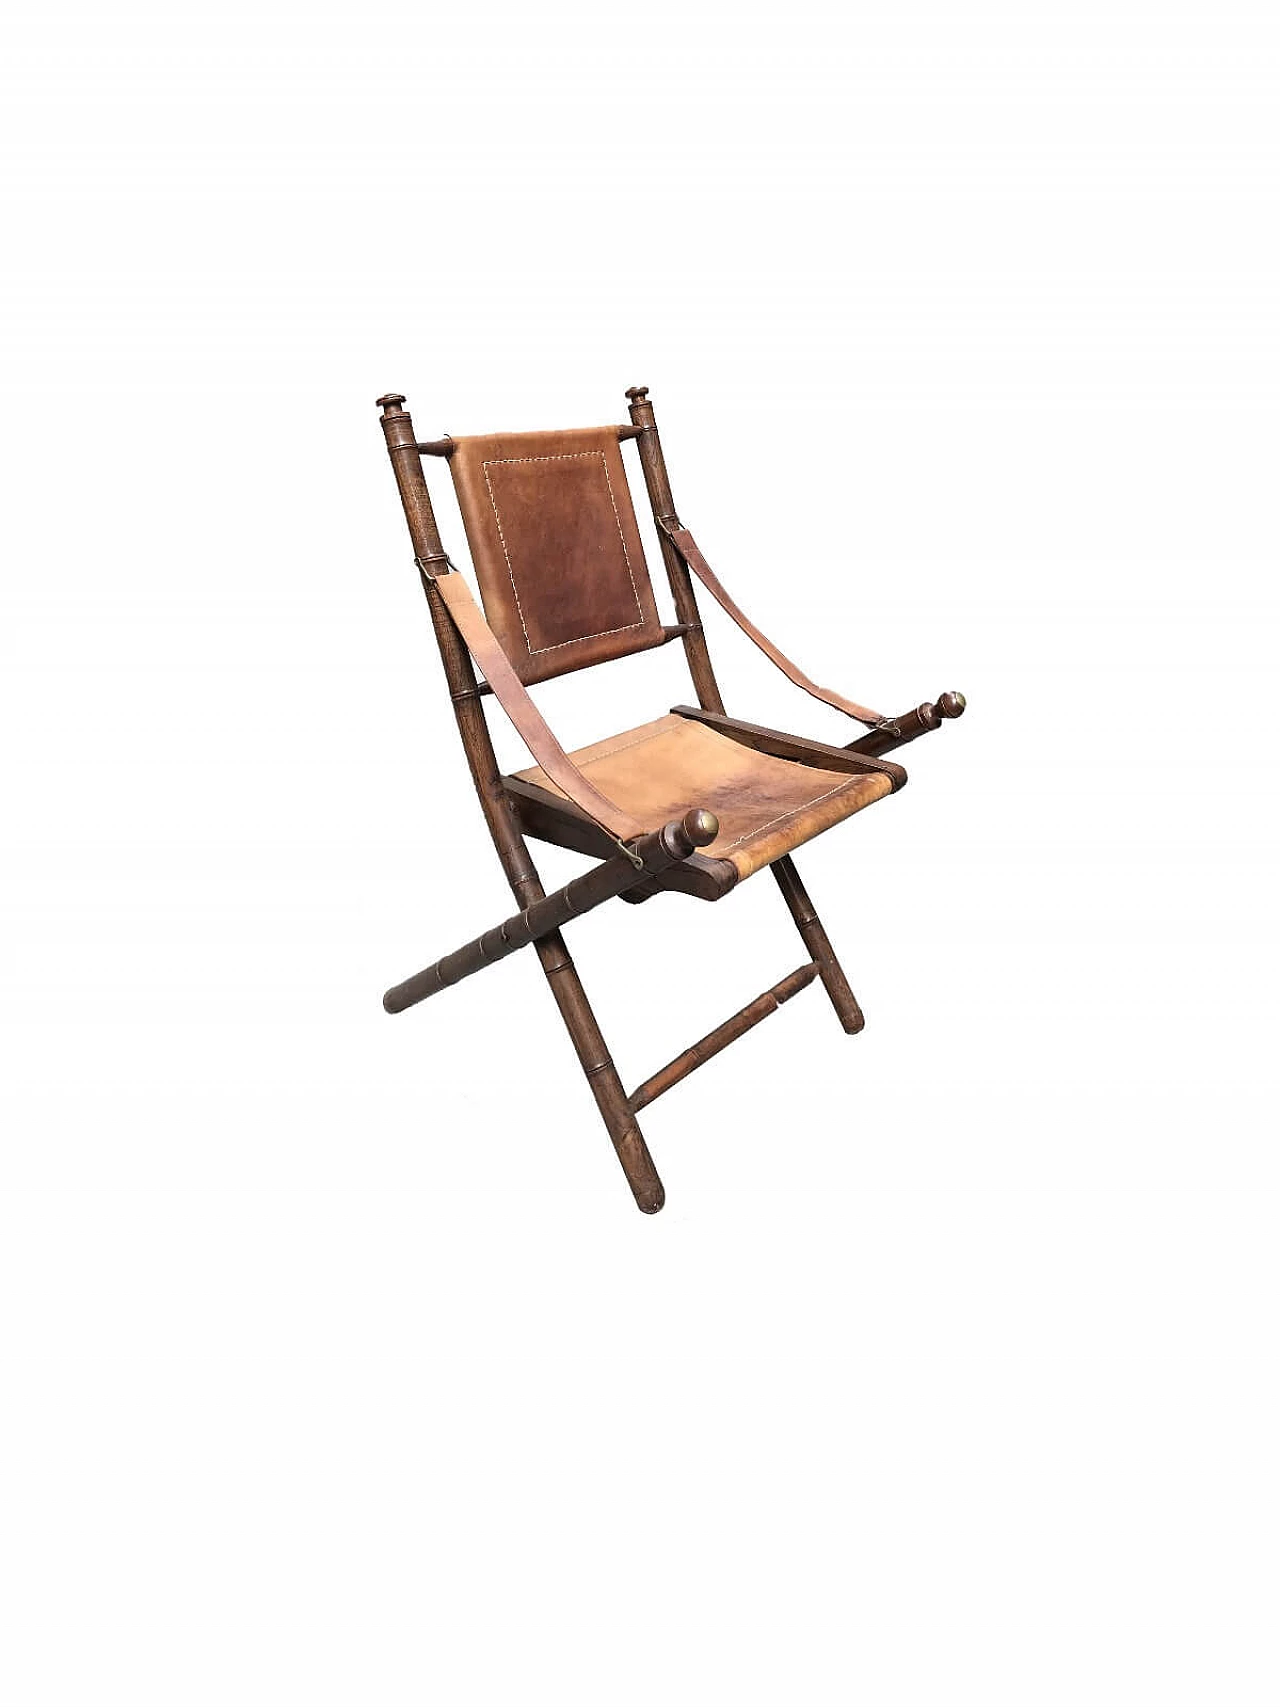 Officer's folding chair in wood and leather, 1850 approx. 1